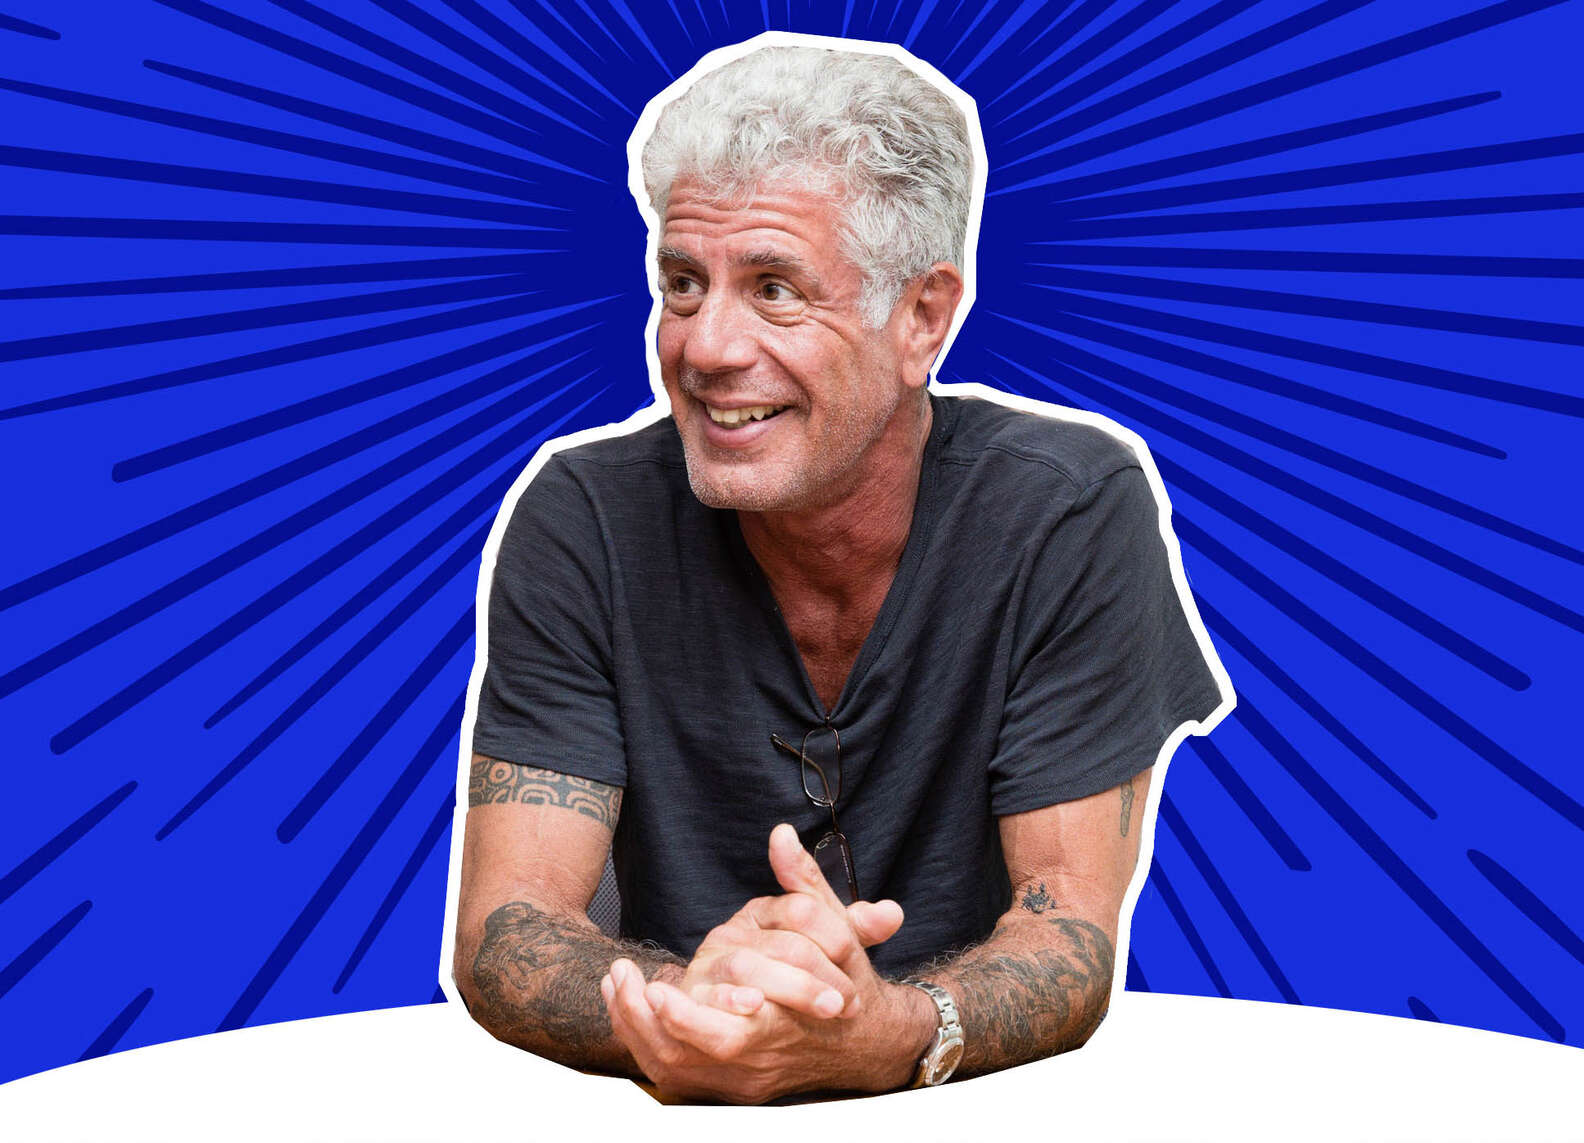 Best Anthony Bourdain Quotes About Life From Parts Unknown & More ...